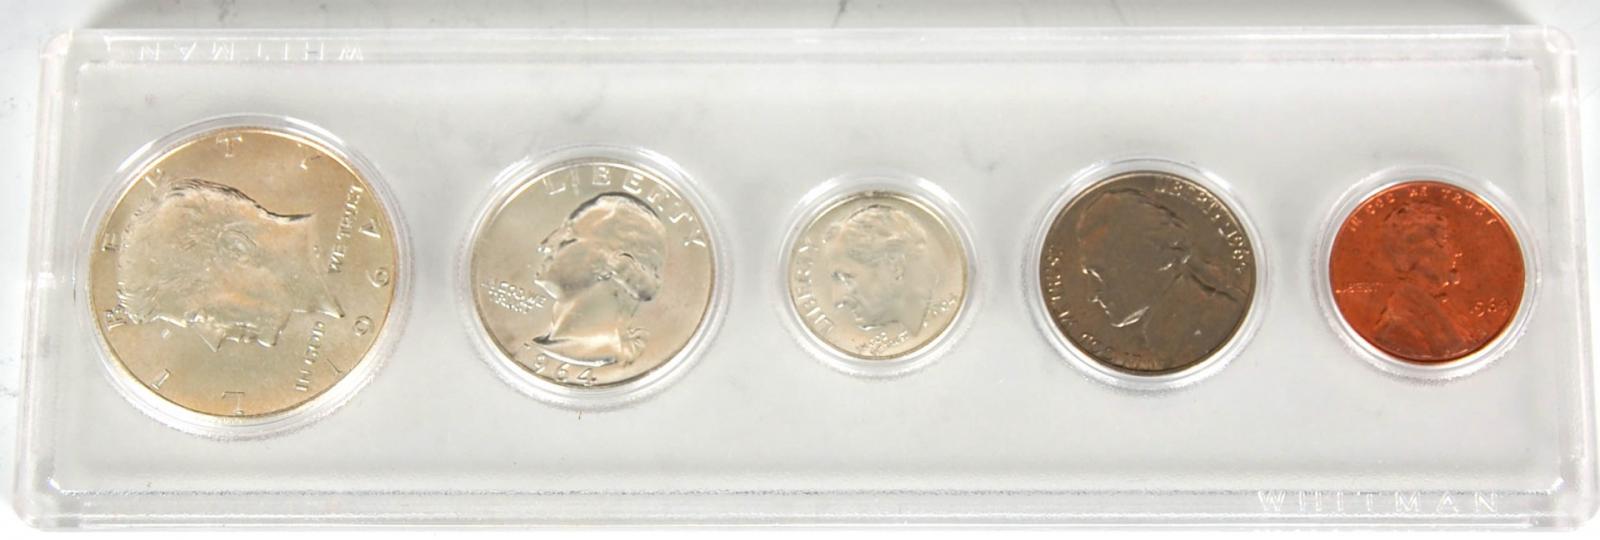 A 1964 UNITED STATES COINS PROOF SET